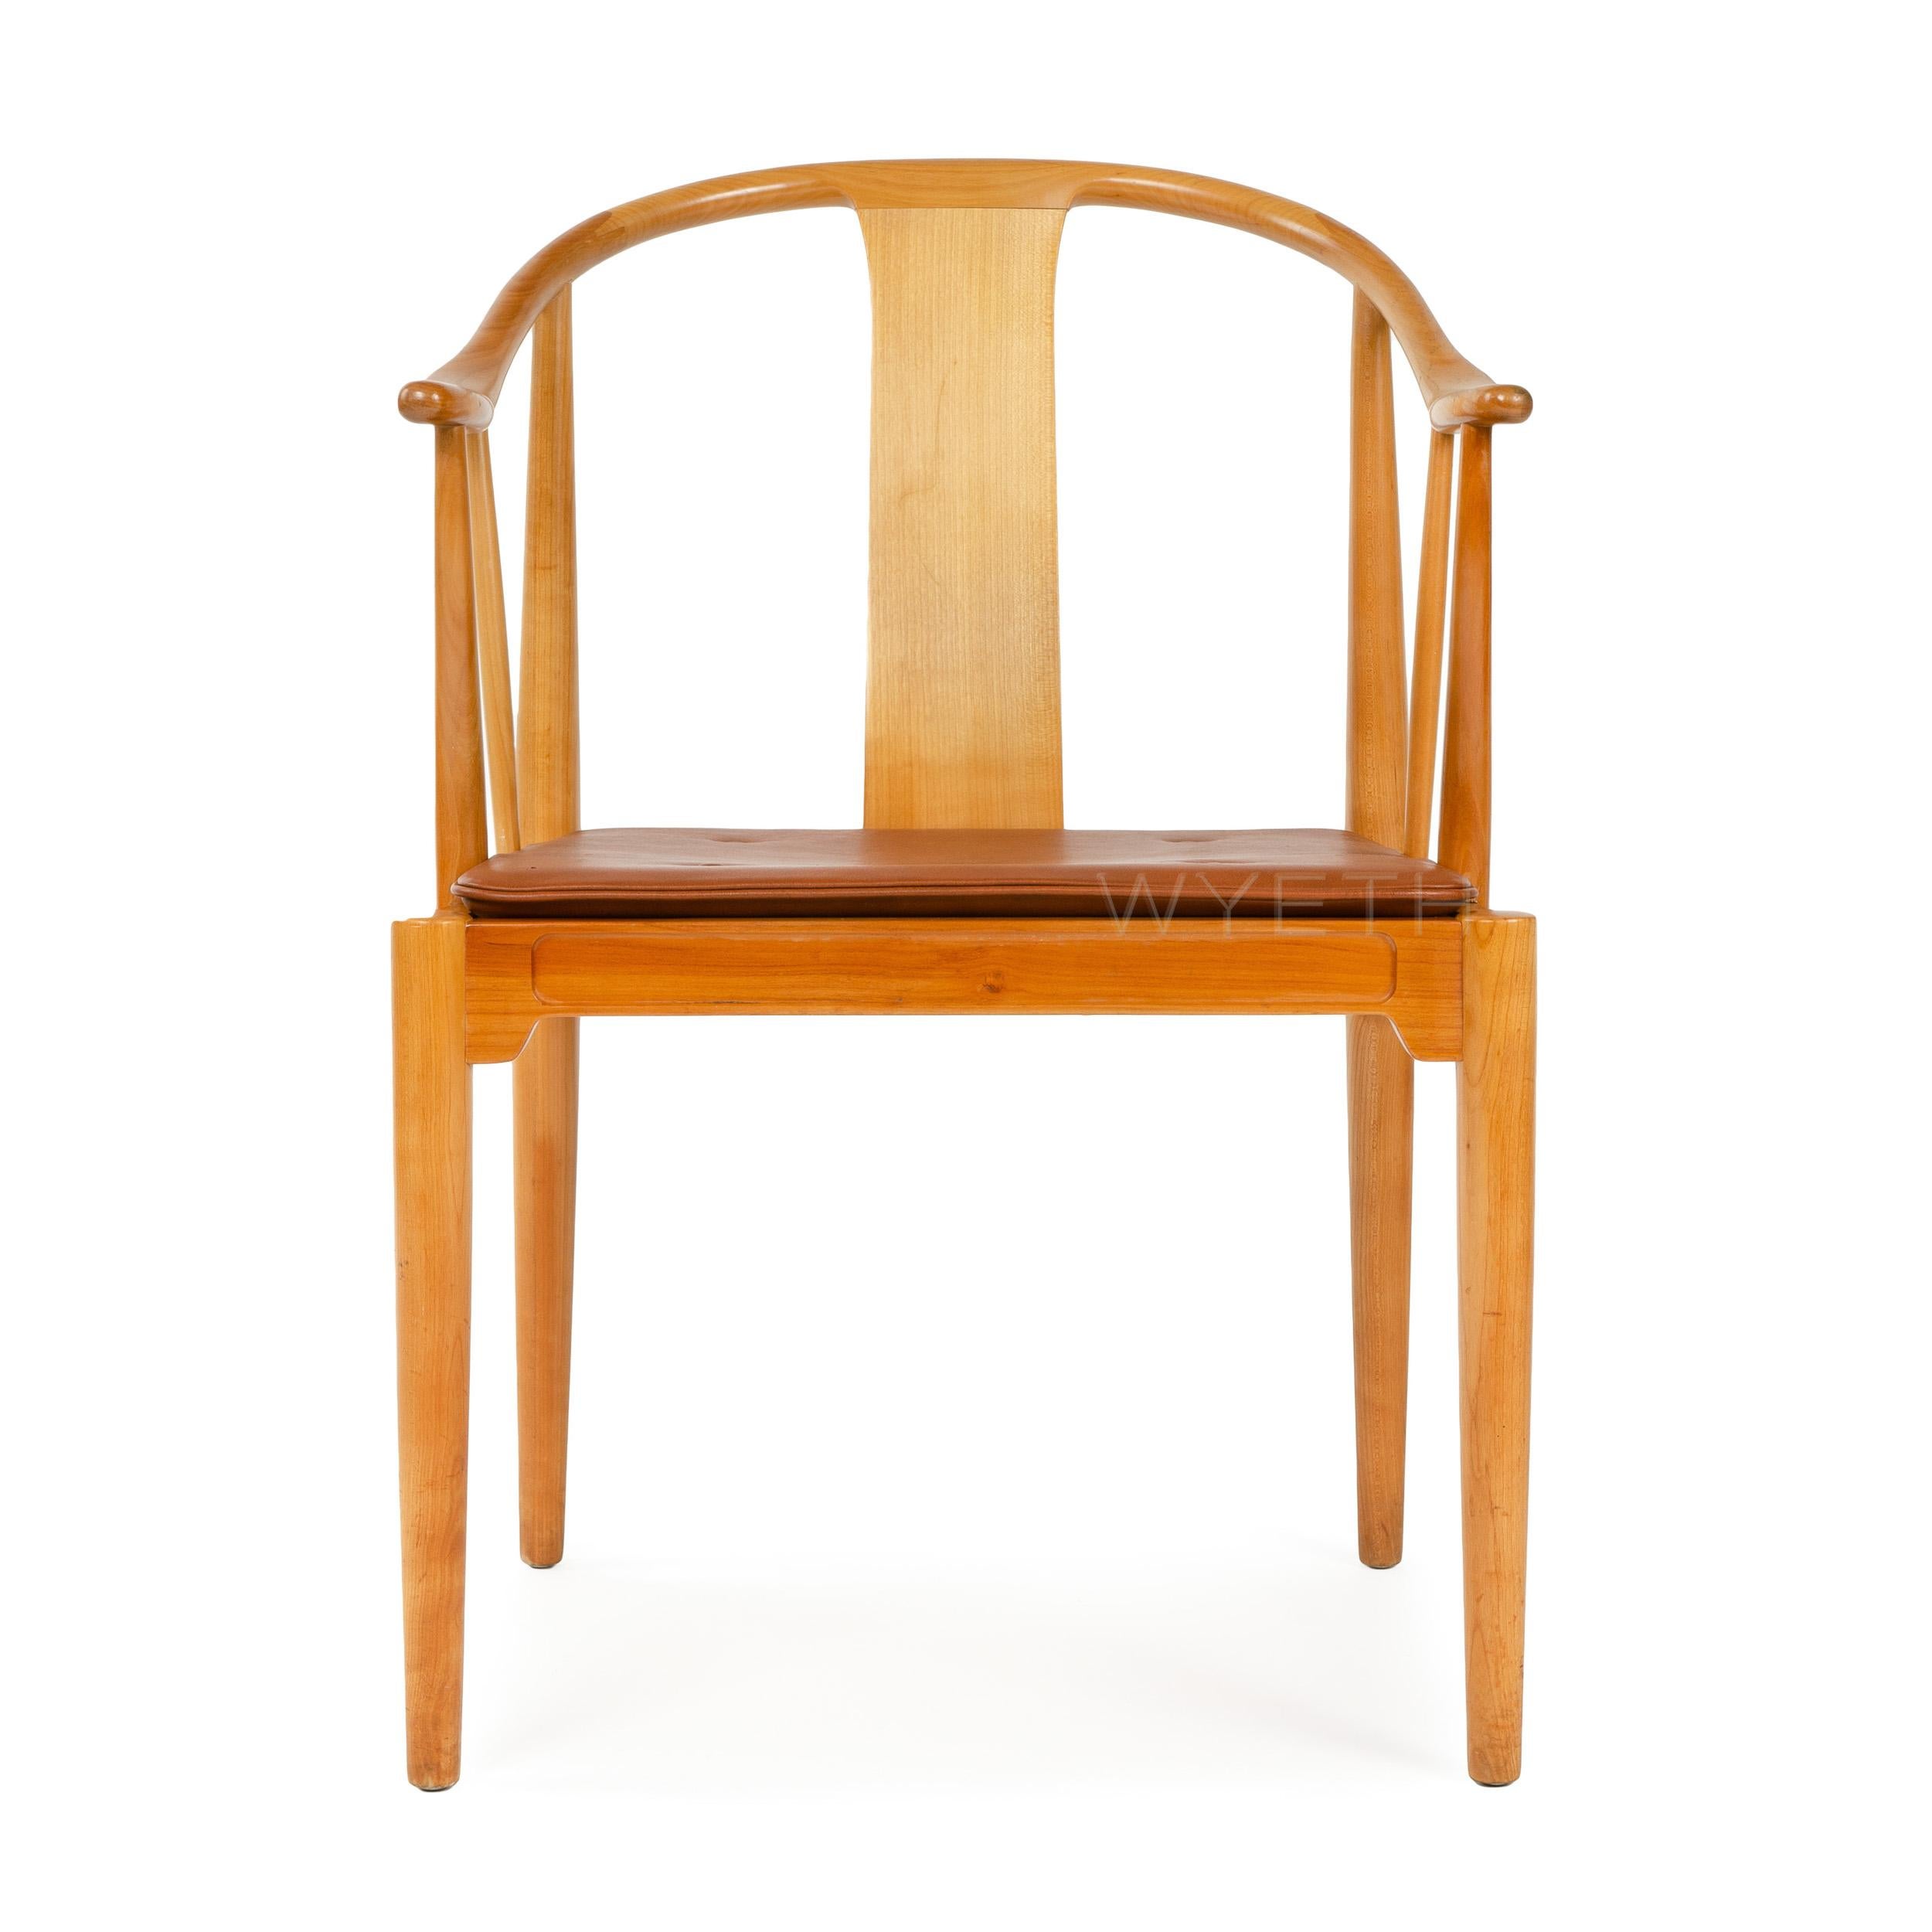 The Chinese Chair designed by Hans Wegner, manufactured by Fritz Hansen. Cherry wood frame featuring a sinuous back and arm design with a natural leather seat cushion. Designed in 1943, crafted in the 1950s in Denmark.